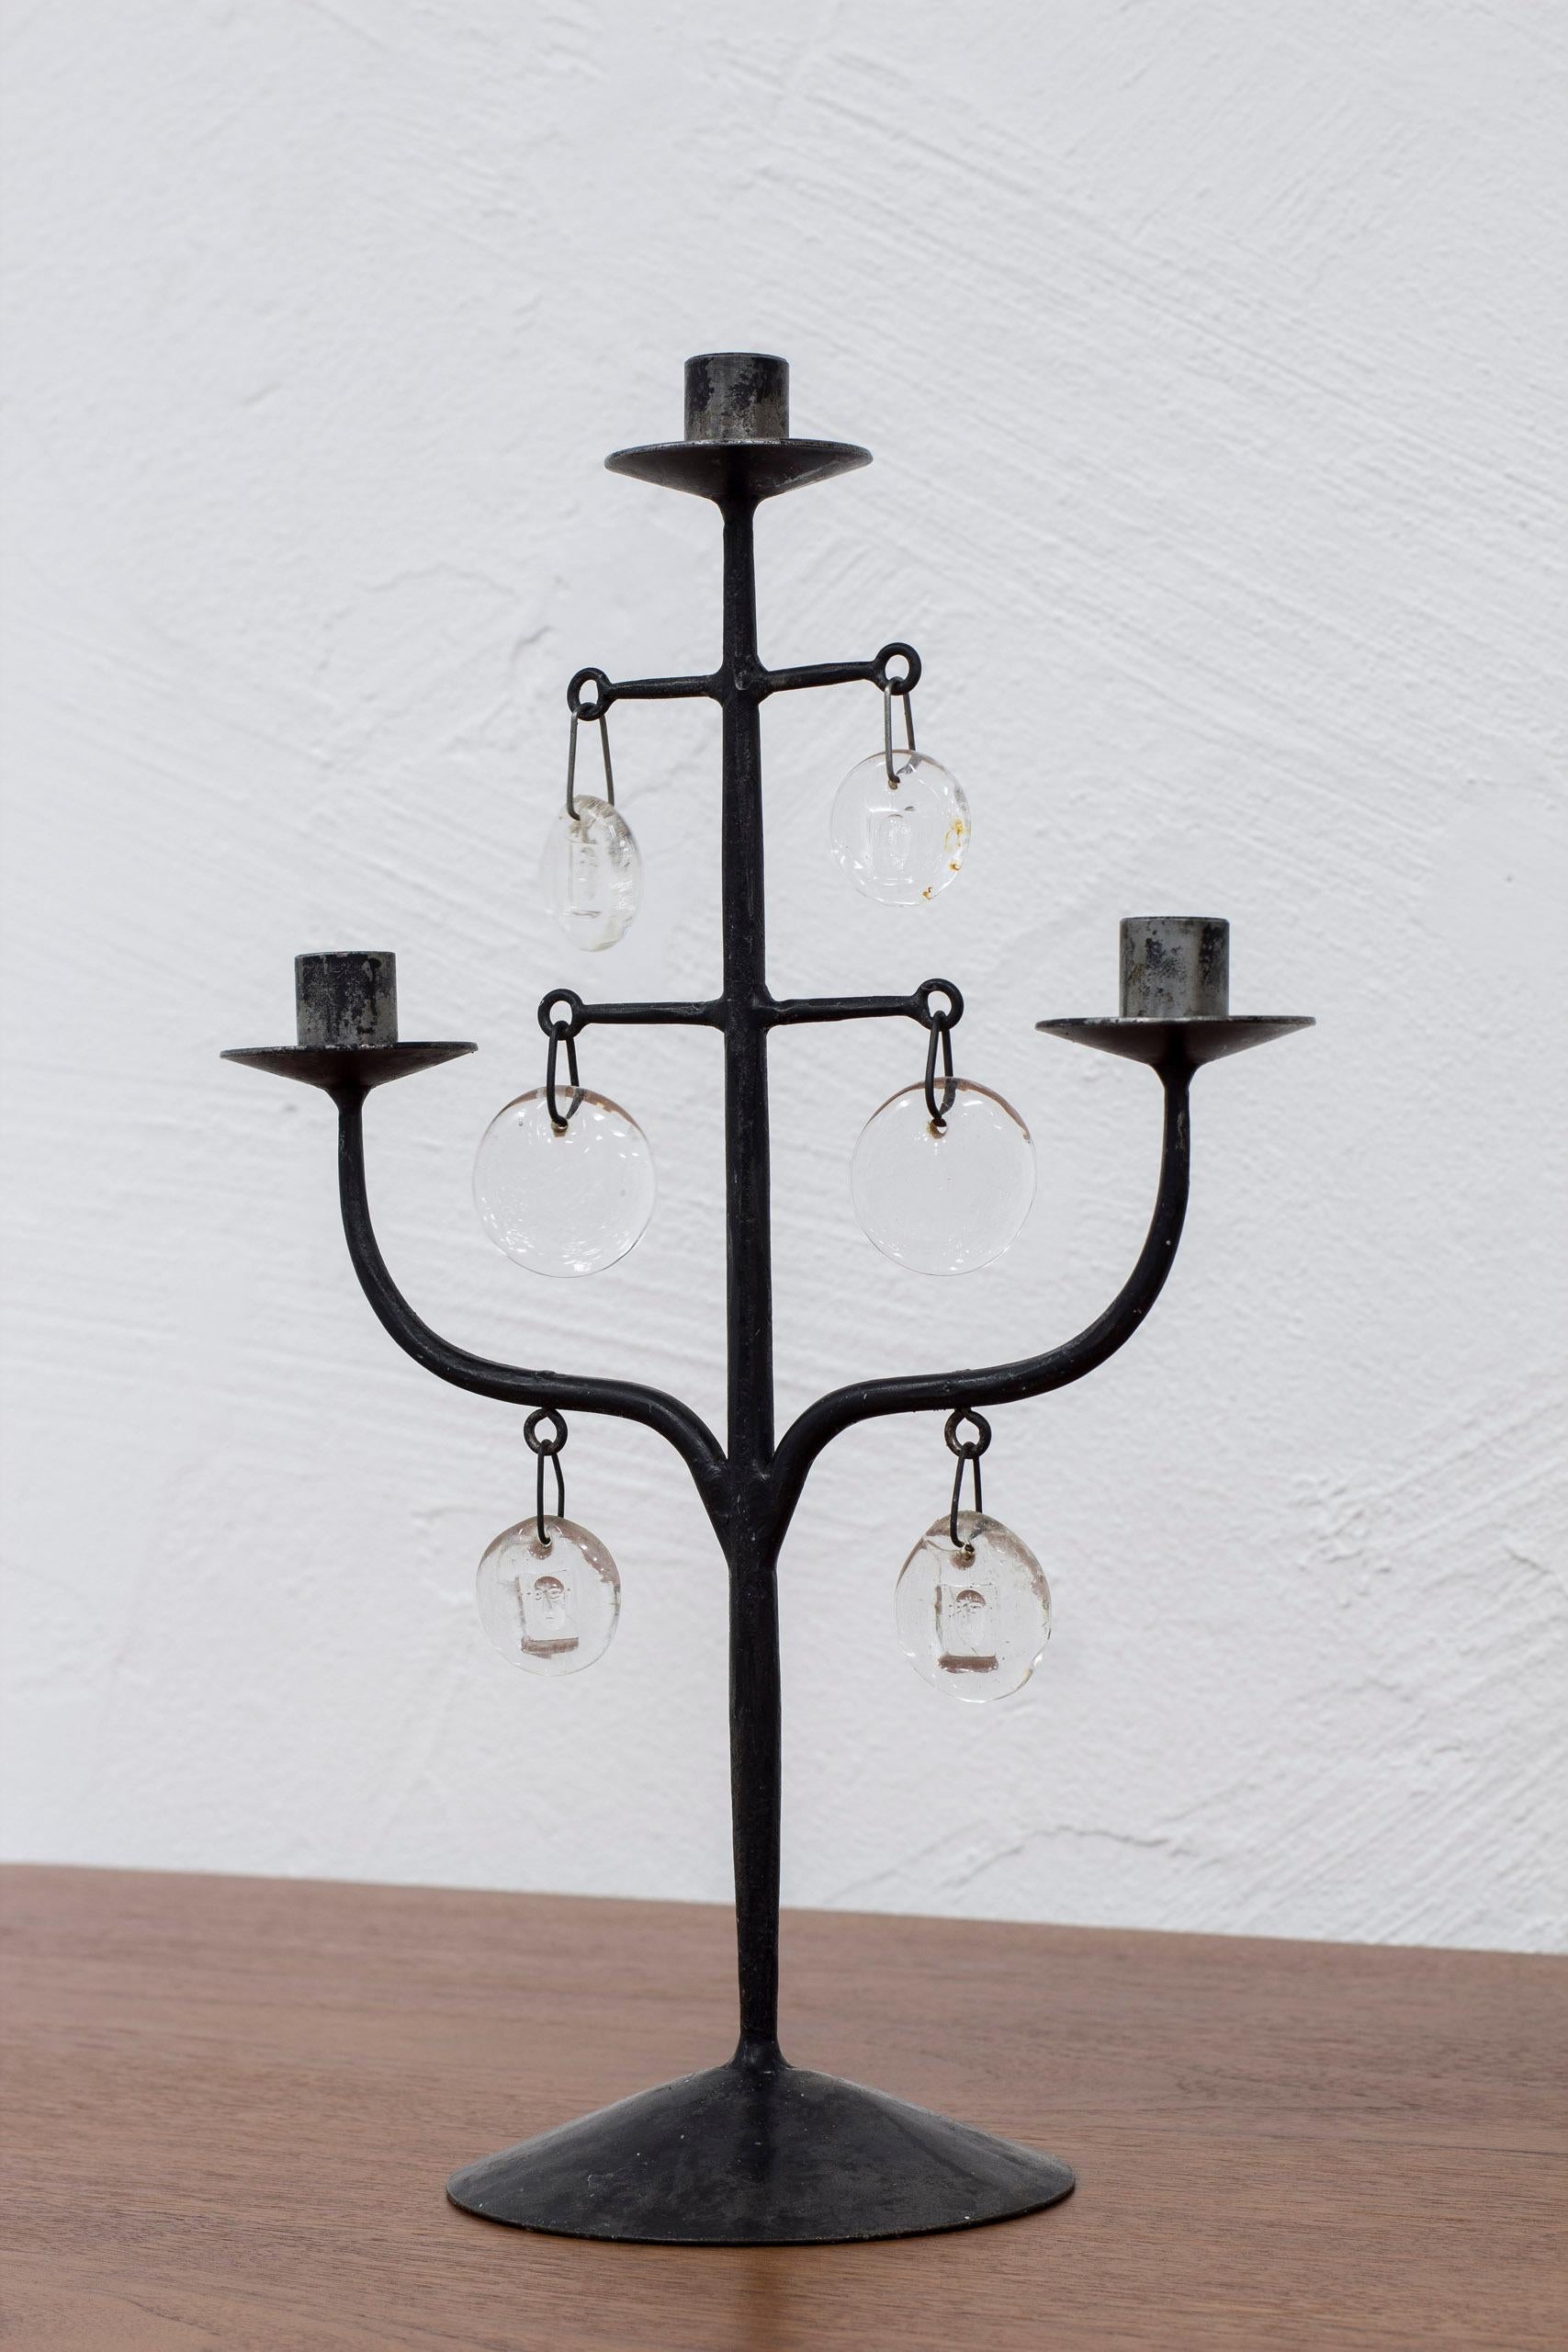 Candelabra designed by Erik Höglund. Made by hand in iron at Boda smide and clear glass prisms from Boda glass. Three arms and six glass shards. Very good vintage condition with light age related patina from use and wear. With original